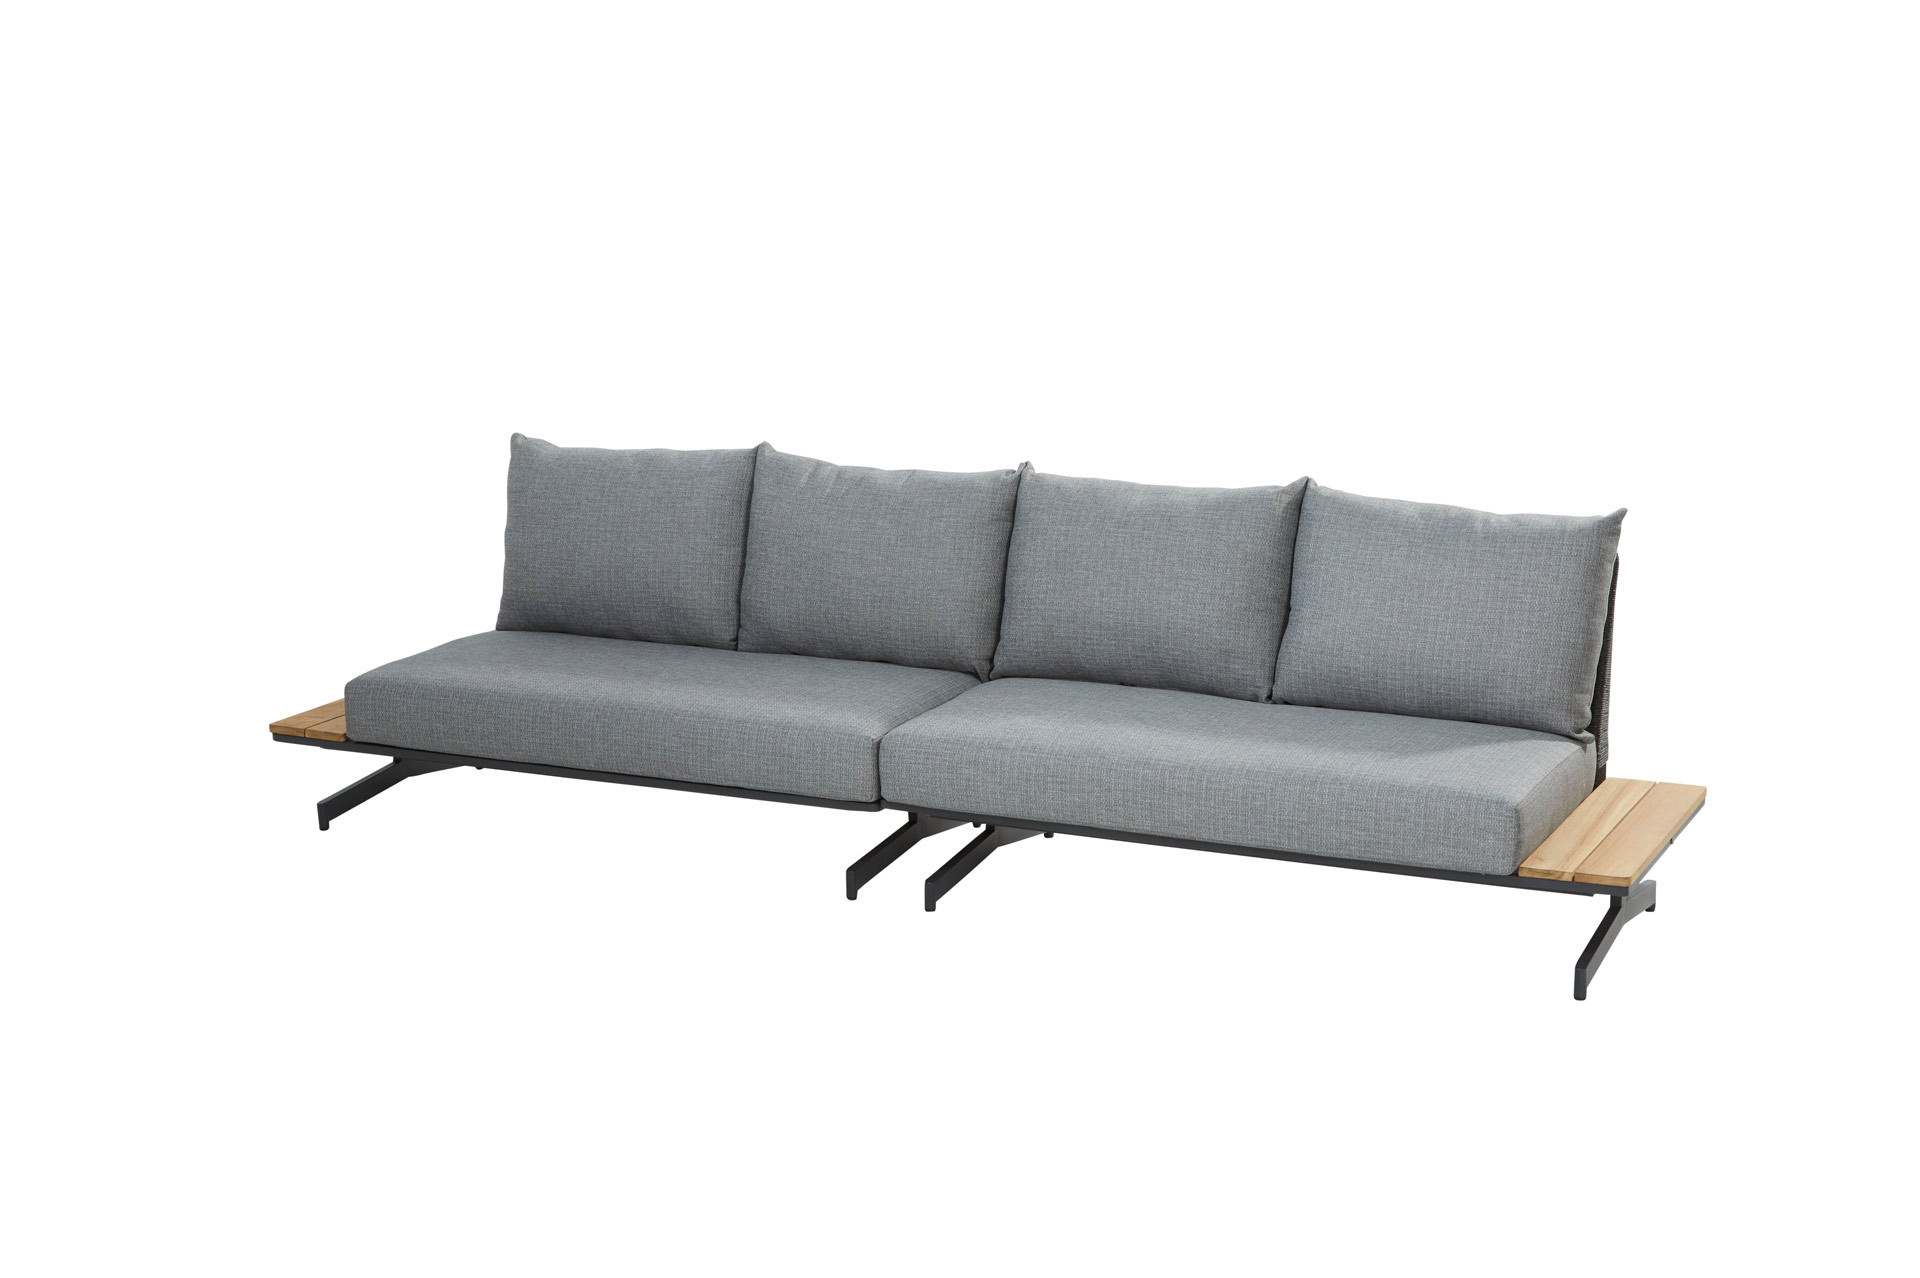 Fortuna modular 4-seater bench left and right